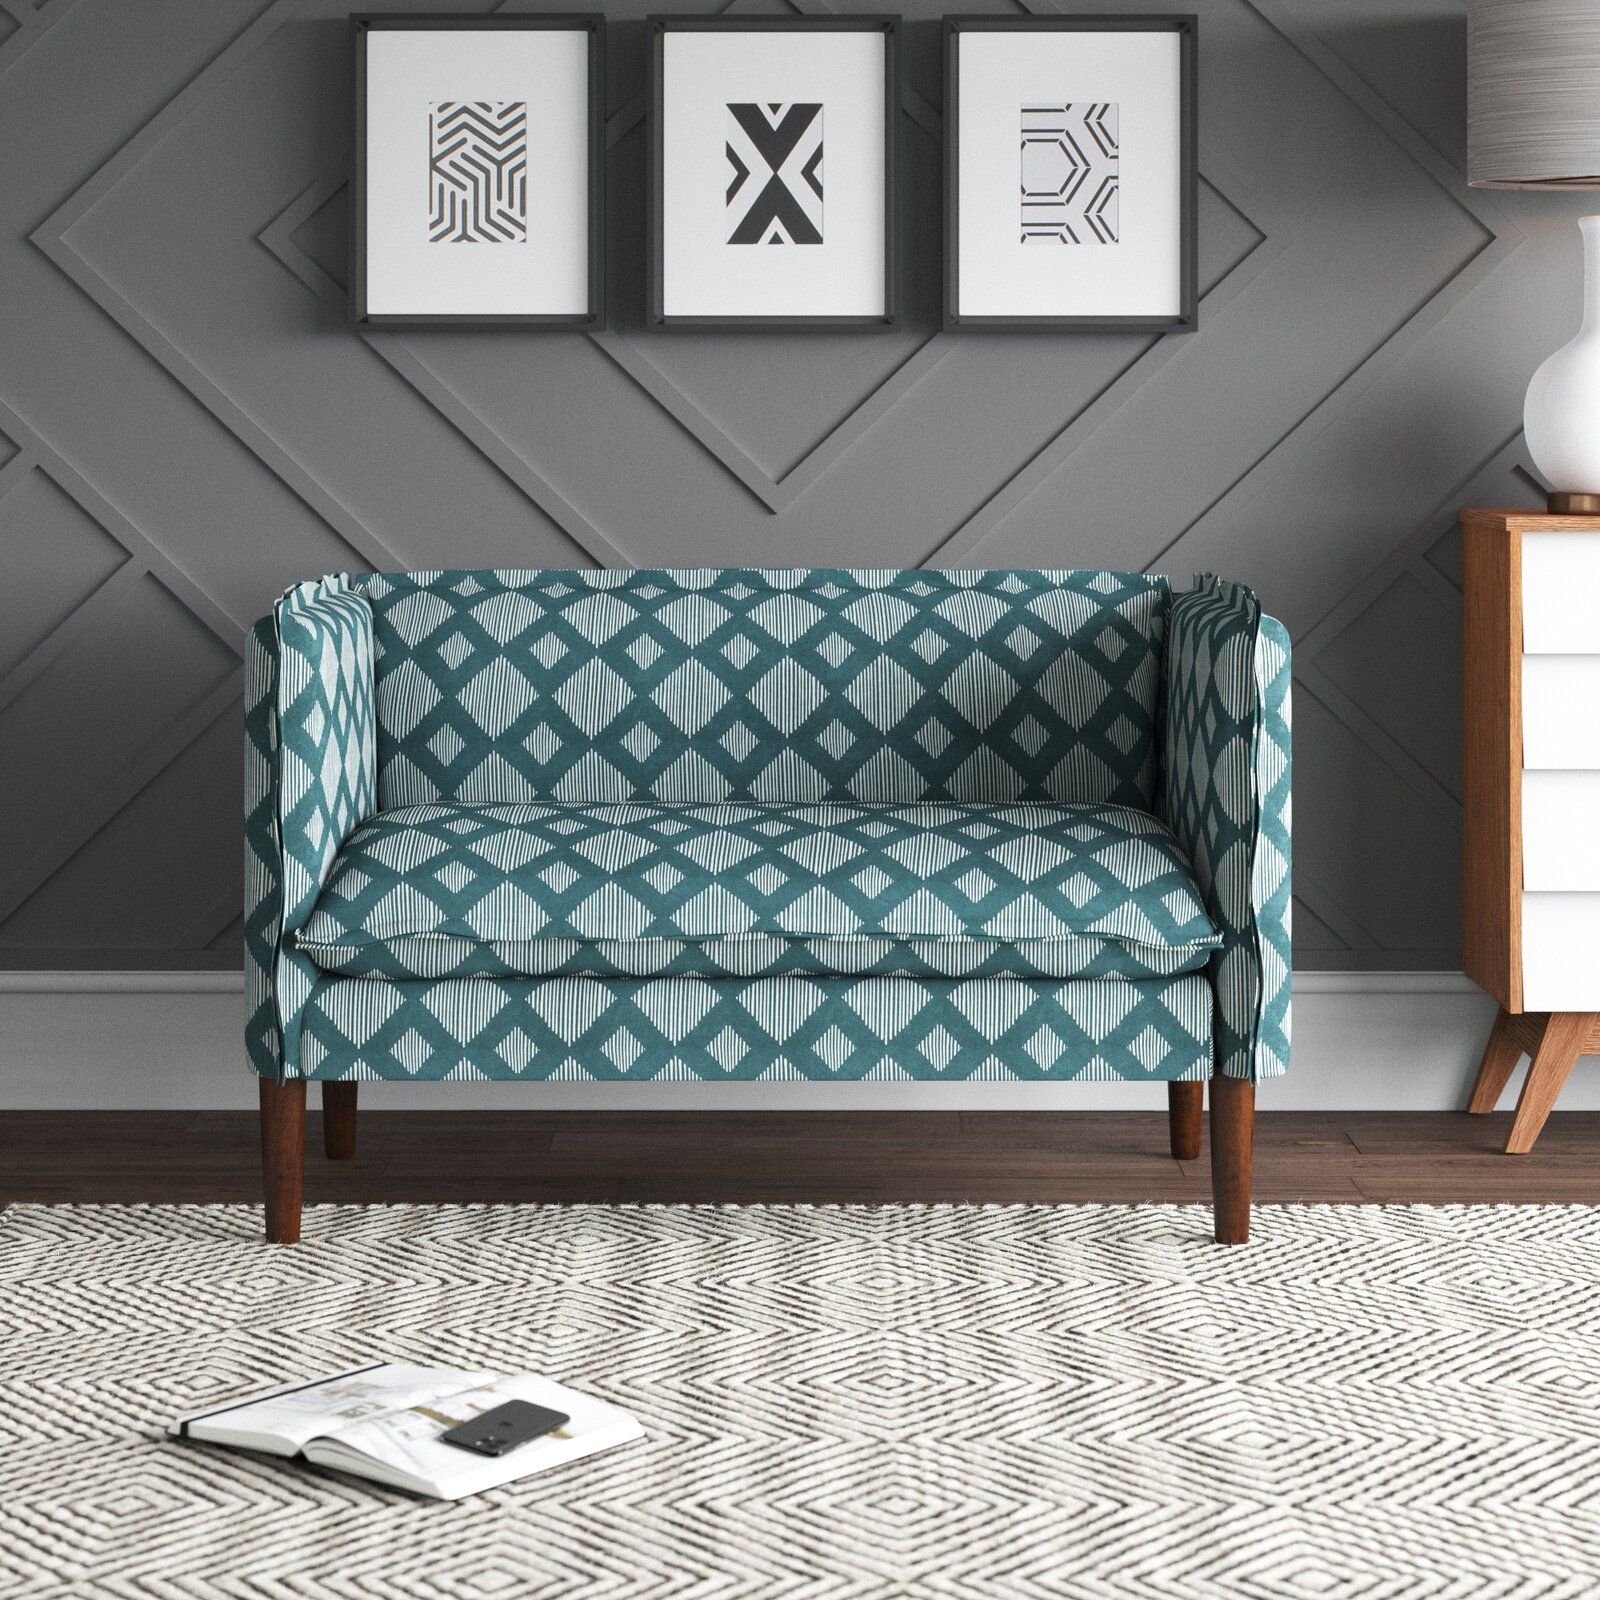 25 Best Sofa Trends In 2021 To Watch Out For – Décor Aid For Sofas In Pattern (Gallery 10 of 20)